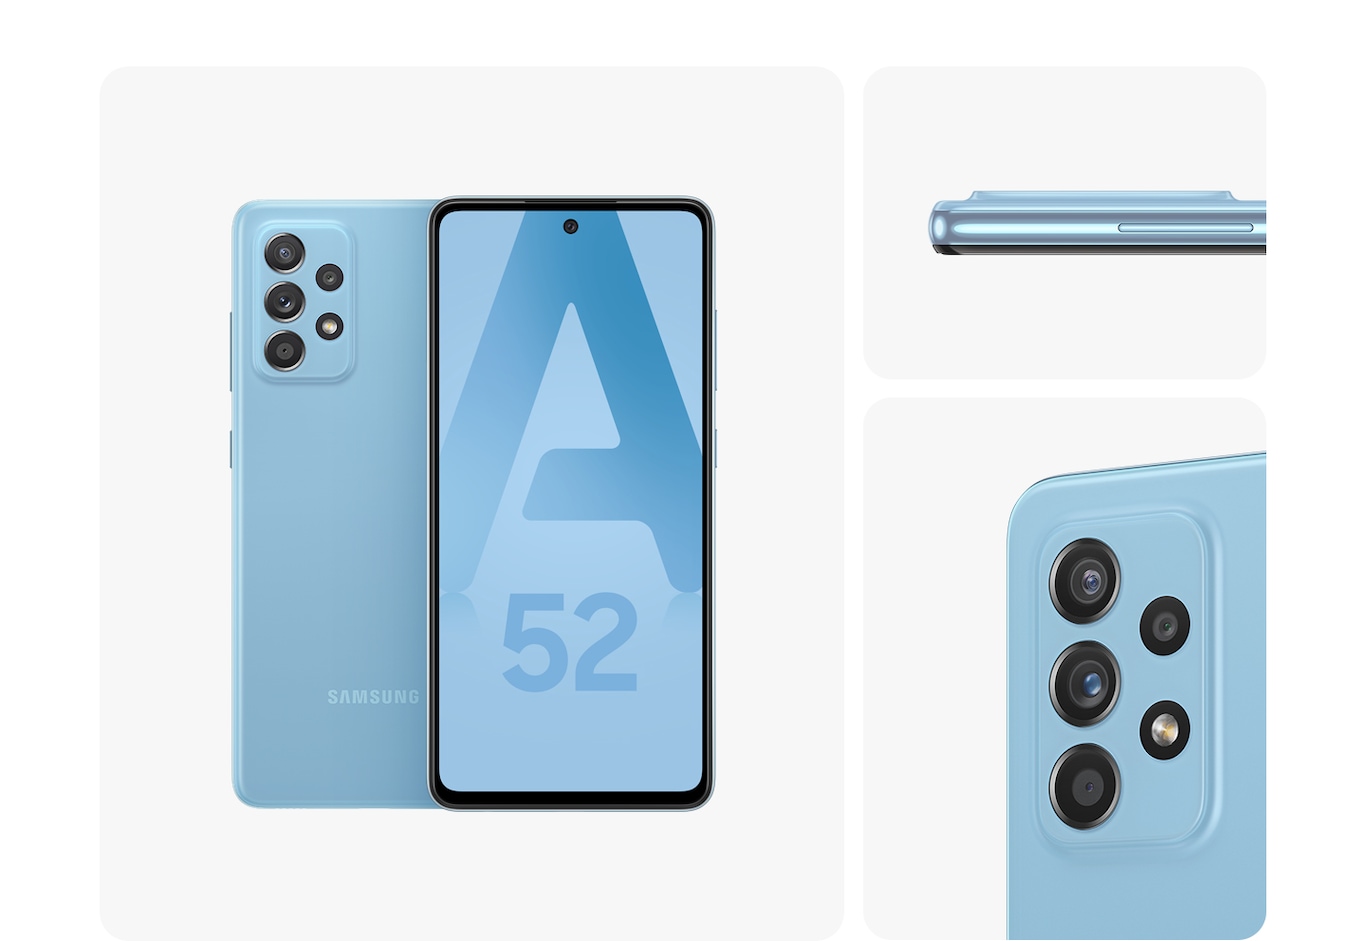 4. BlueGalaxy A52 in Awesome Blue, seen from multiple angles to show the design: rear, front, side and close-up on the rear camera.